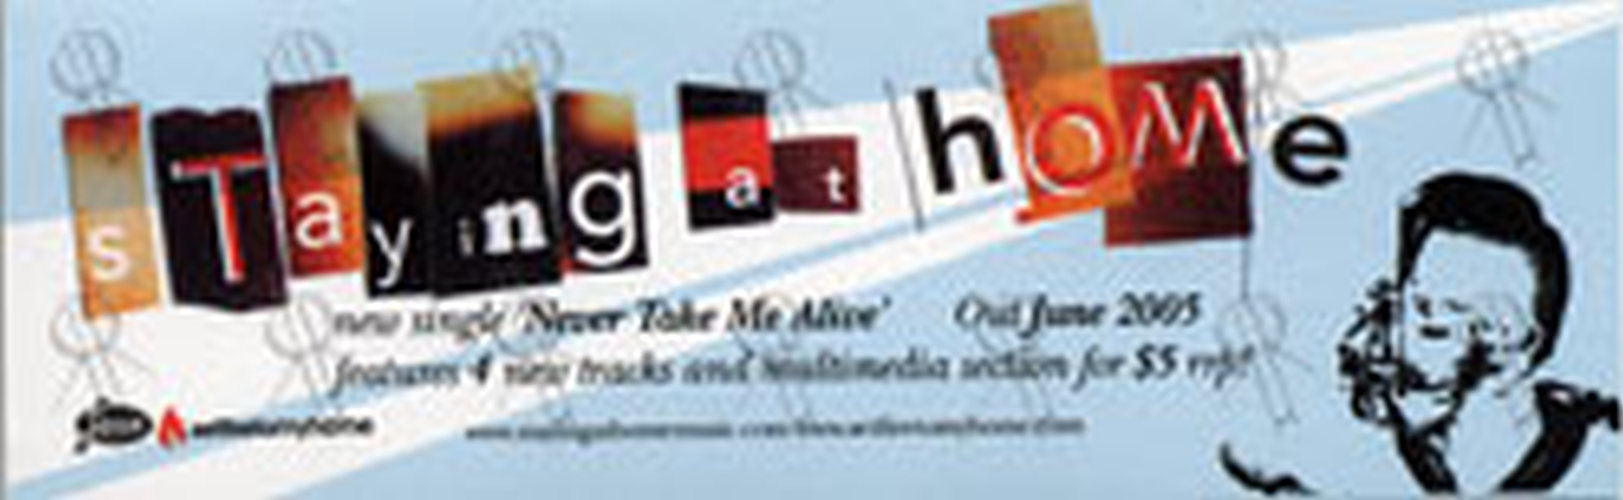 STAYING AT HOME - 'Never Take Me Alive' Single Sticker - 1